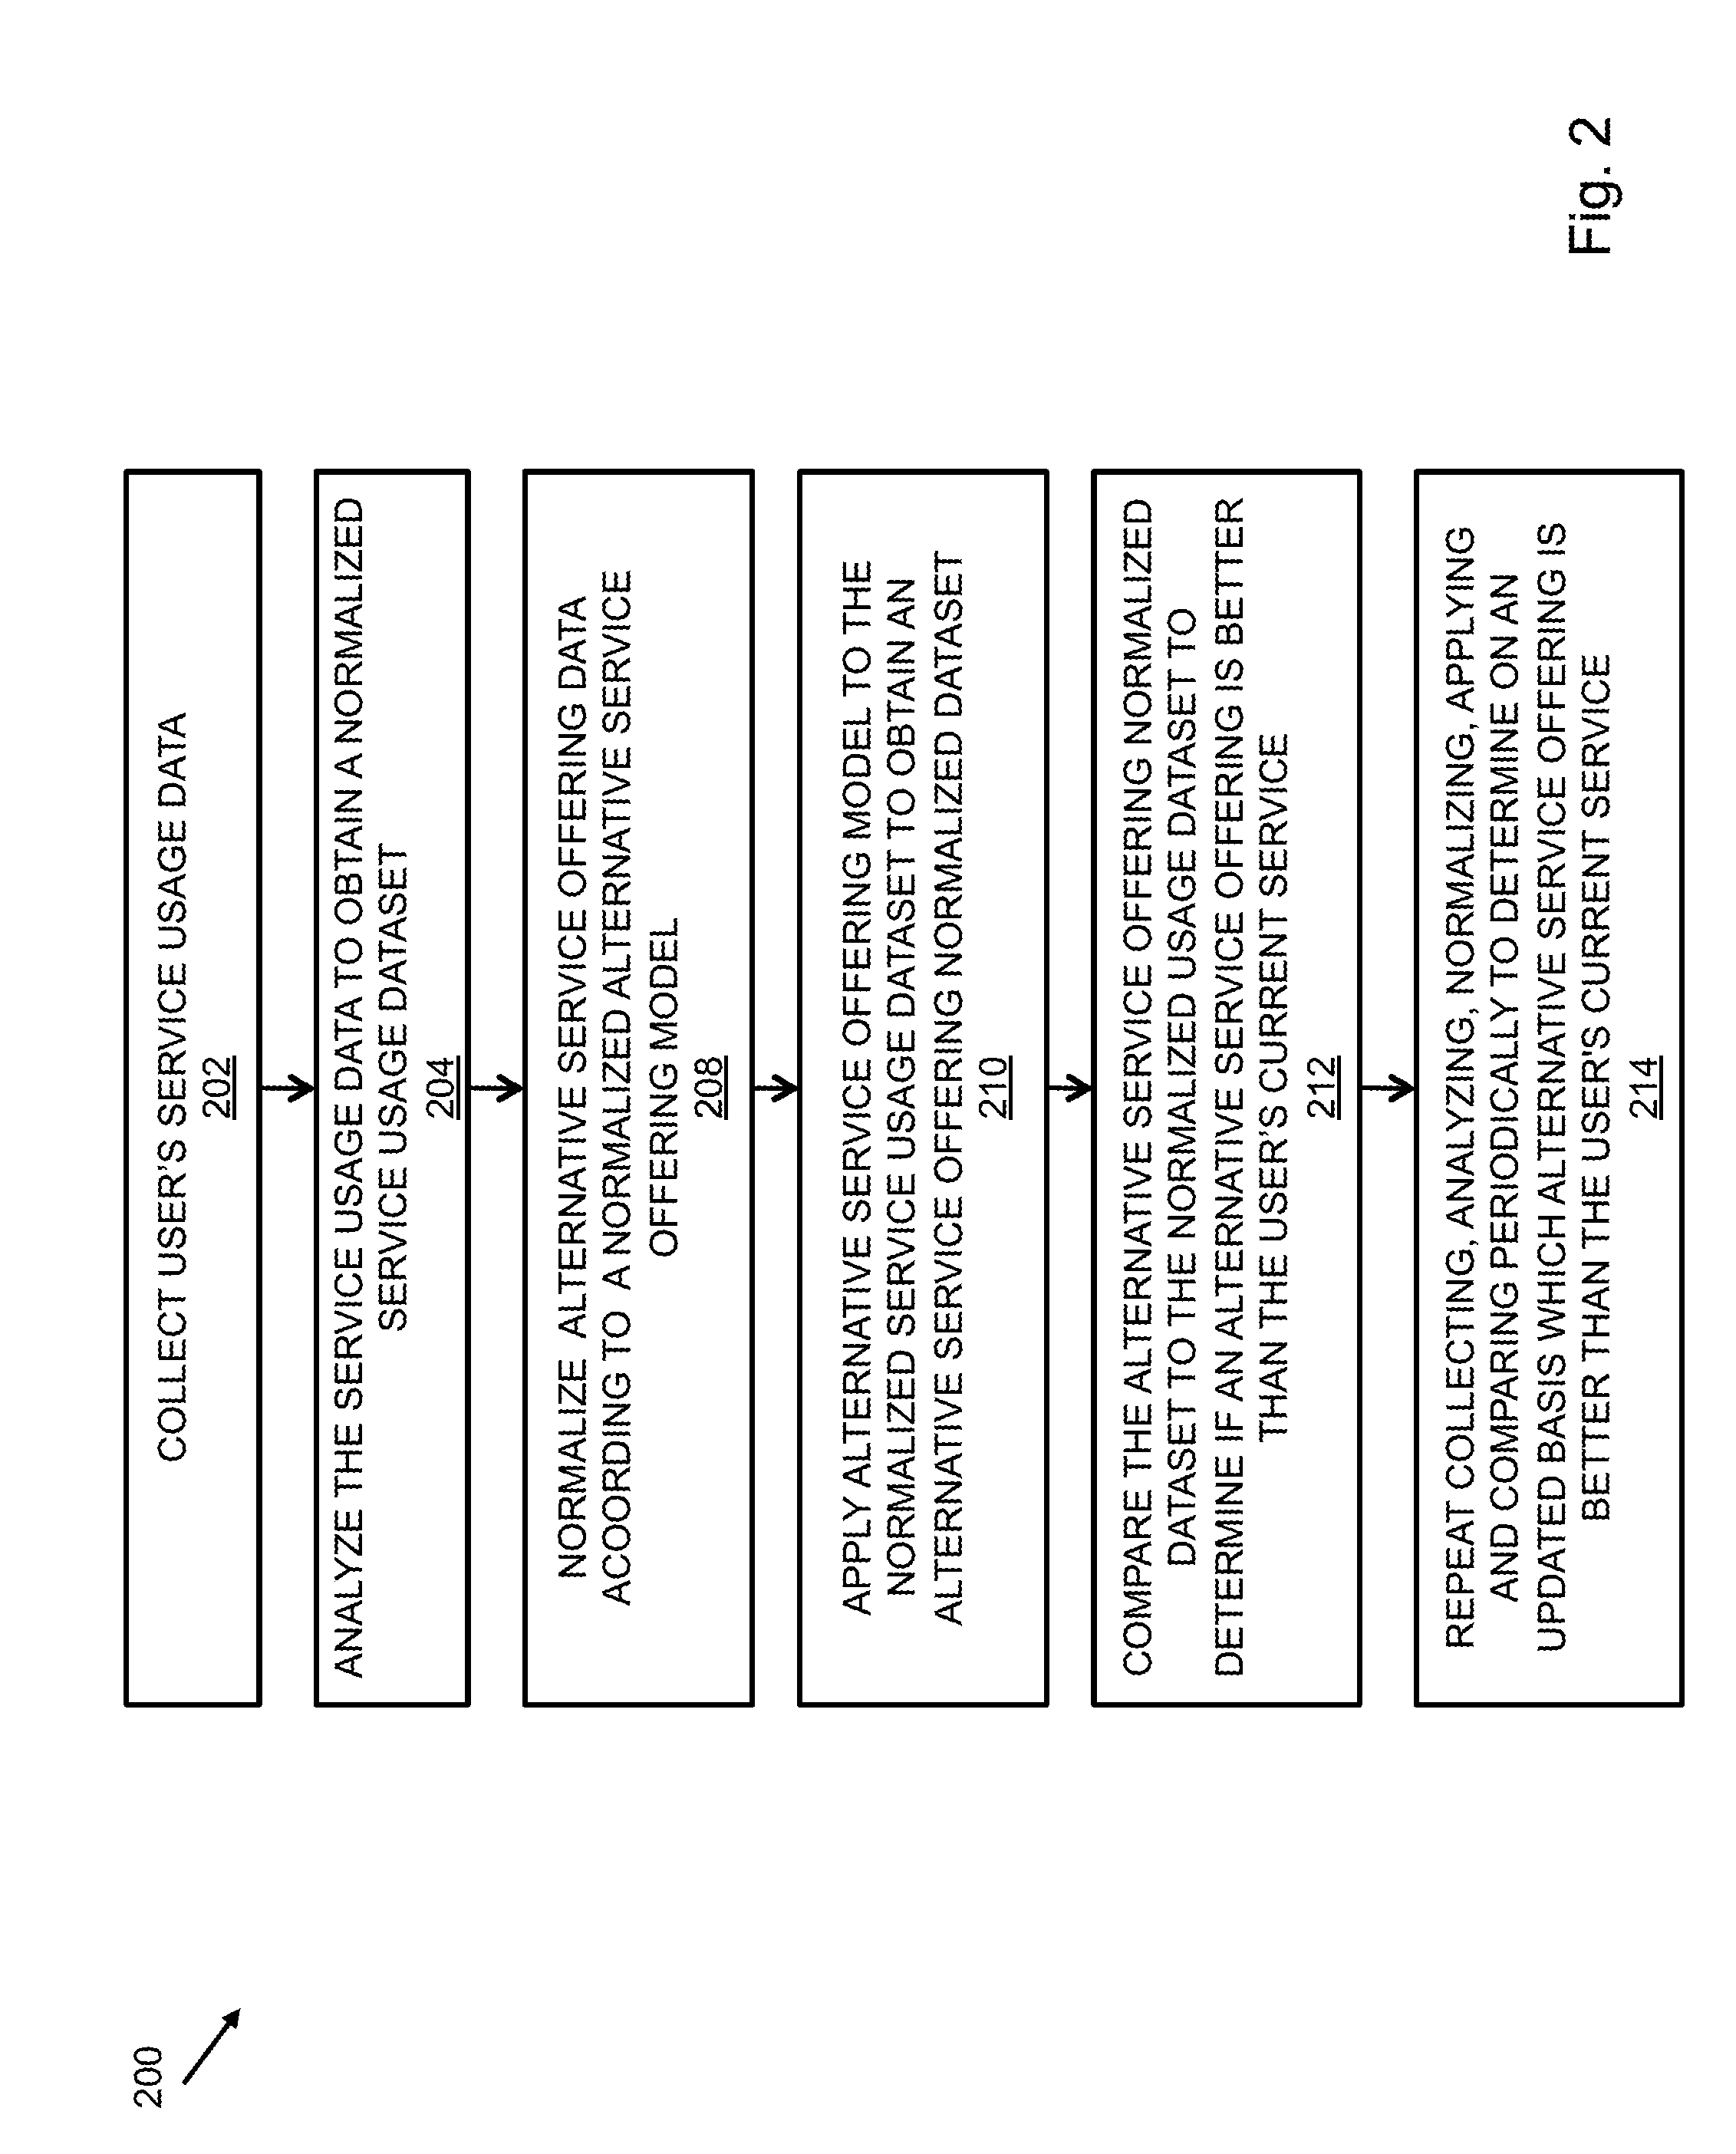 System and method for providing a savings opportunity in association with a financial account